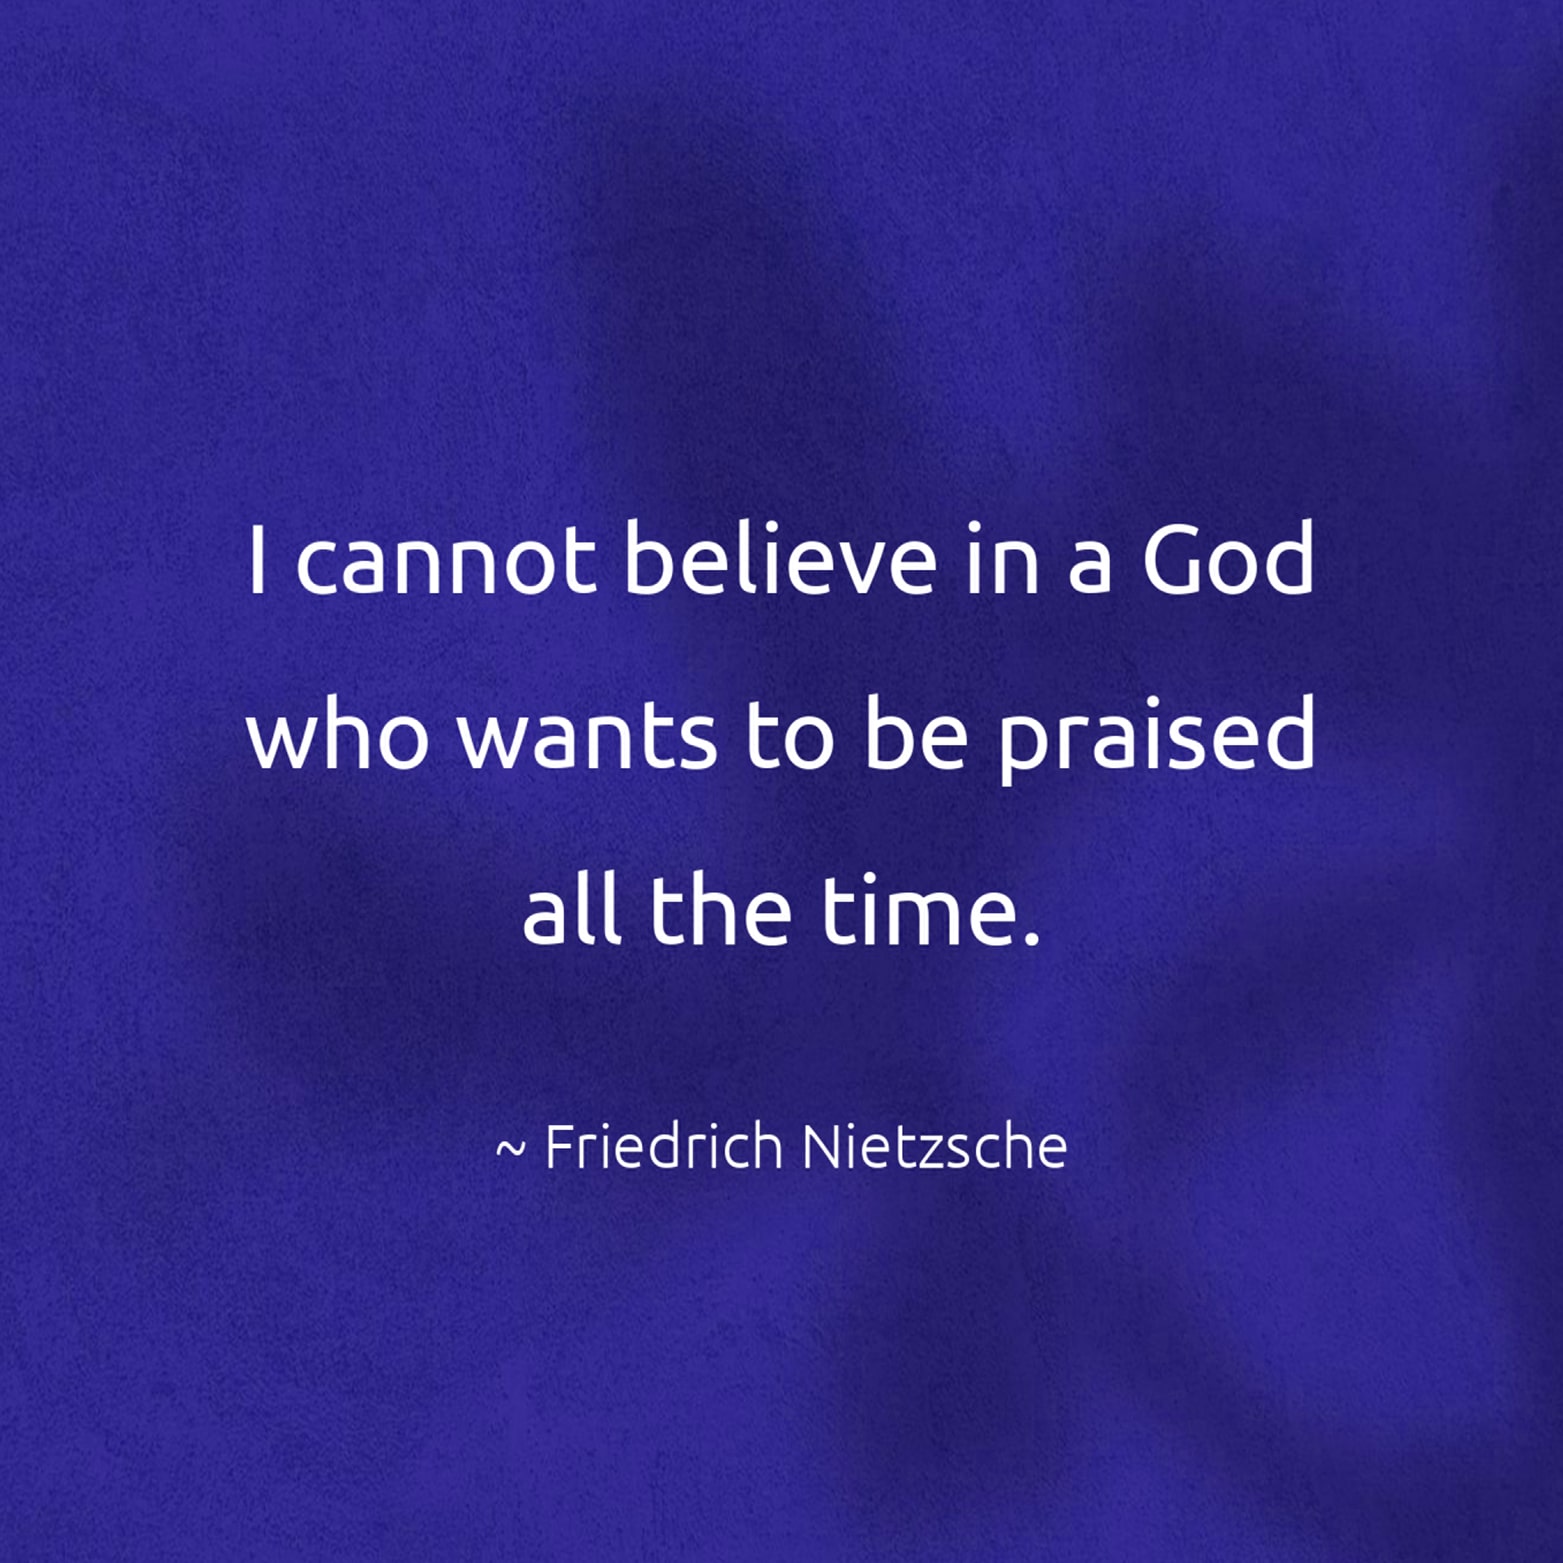 I cannot believe in a God who wants to be praised all the time. - Friedrich Nietzsche